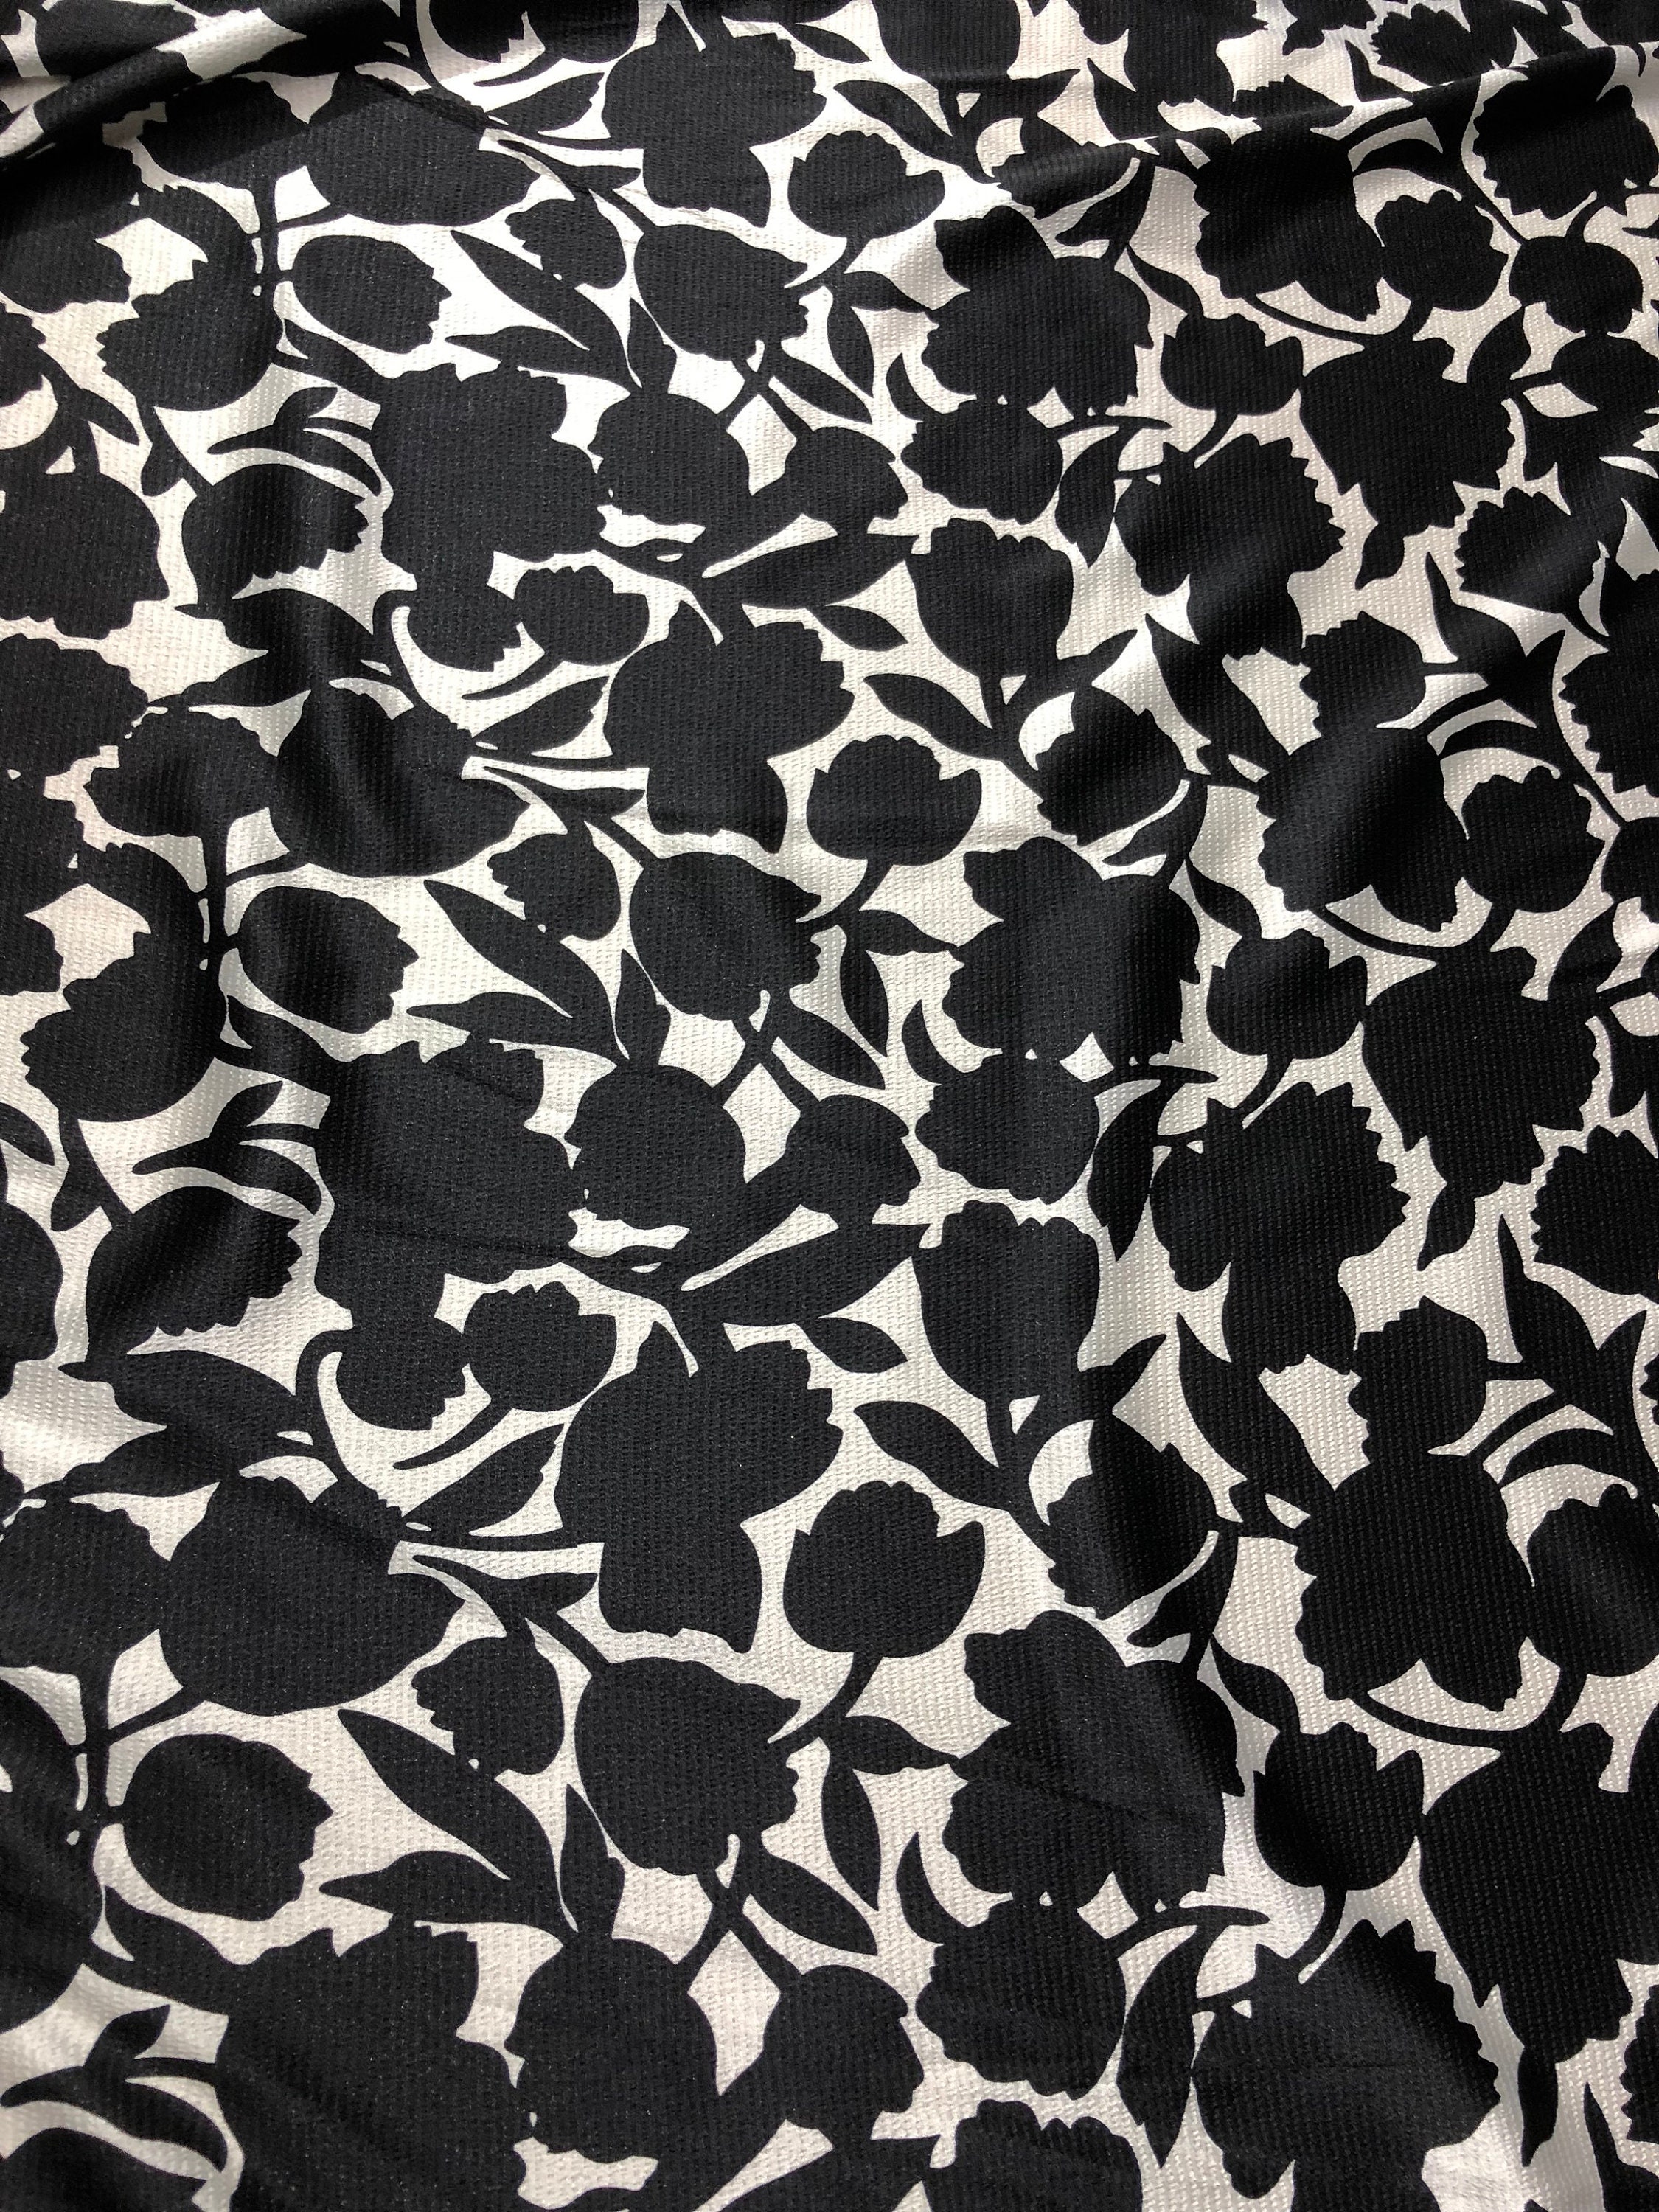 Satin charmeuse print 54 wide Beautiful black and white floral design ...